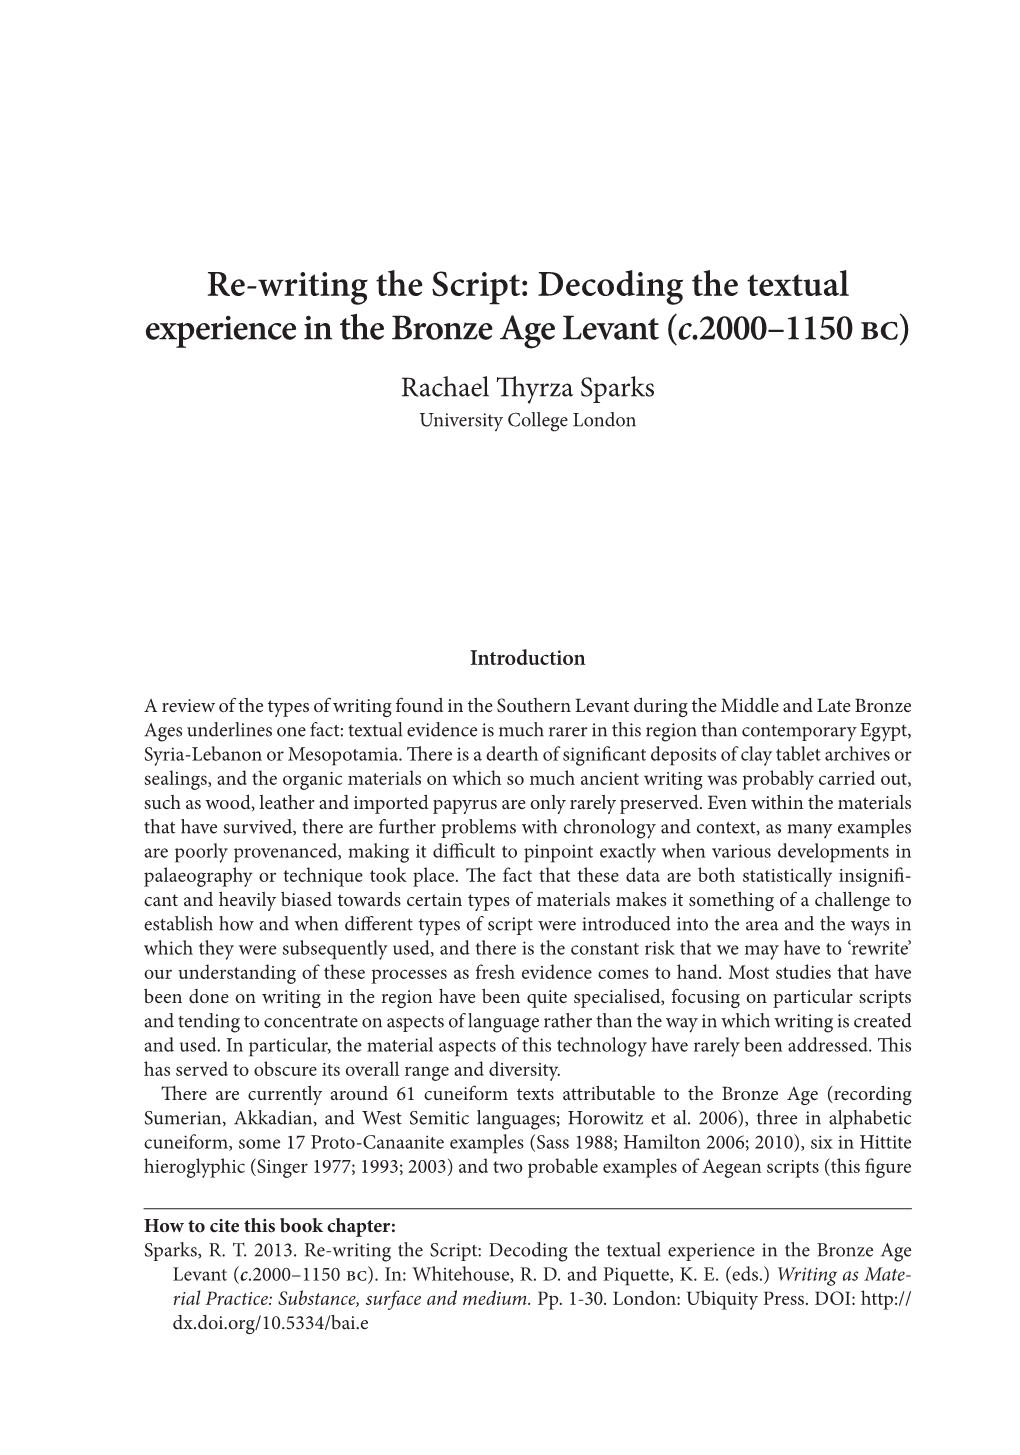 Re-Writing the Script: Decoding the Textual Experience in the Bronze Age Levant (C.2000–1150 Bc) Rachael Thyrza Sparks University College London